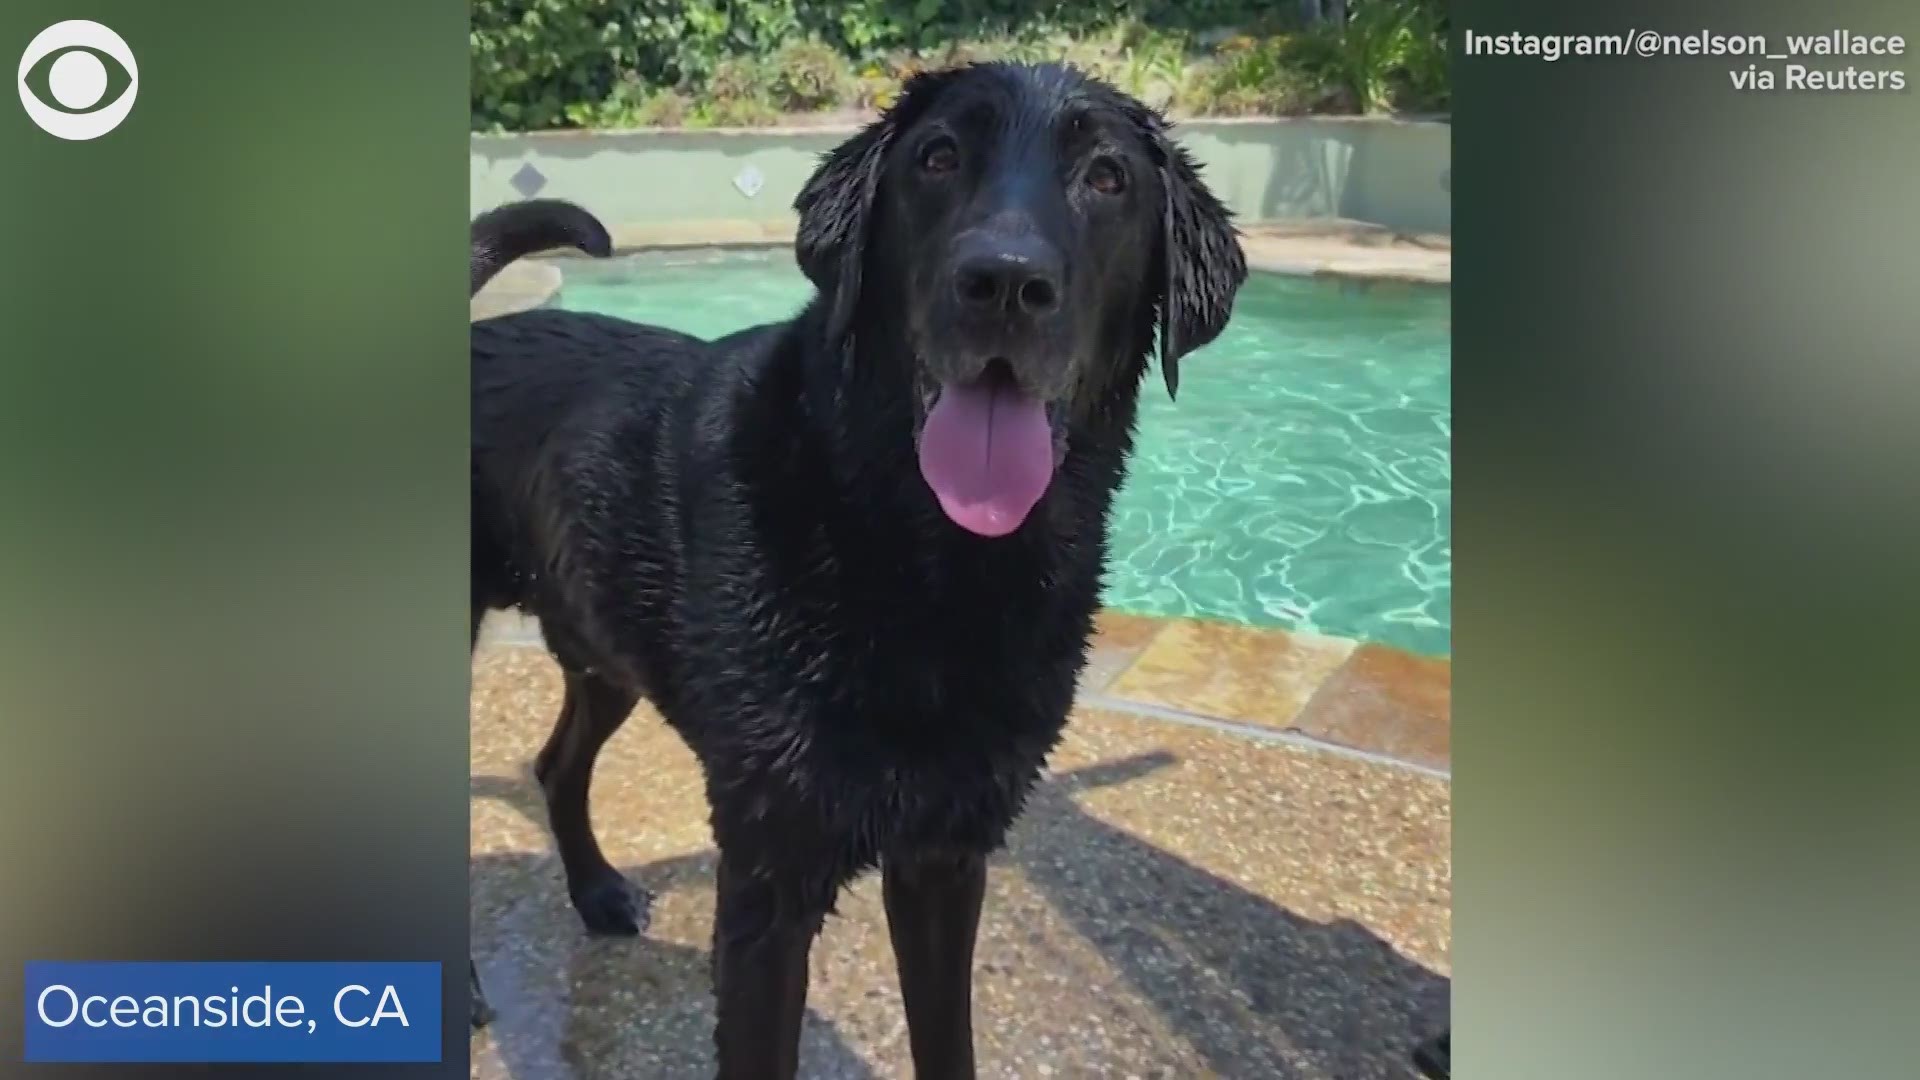 Check out these dogs named “Nelson” and “Wallace” enjoying a pool day